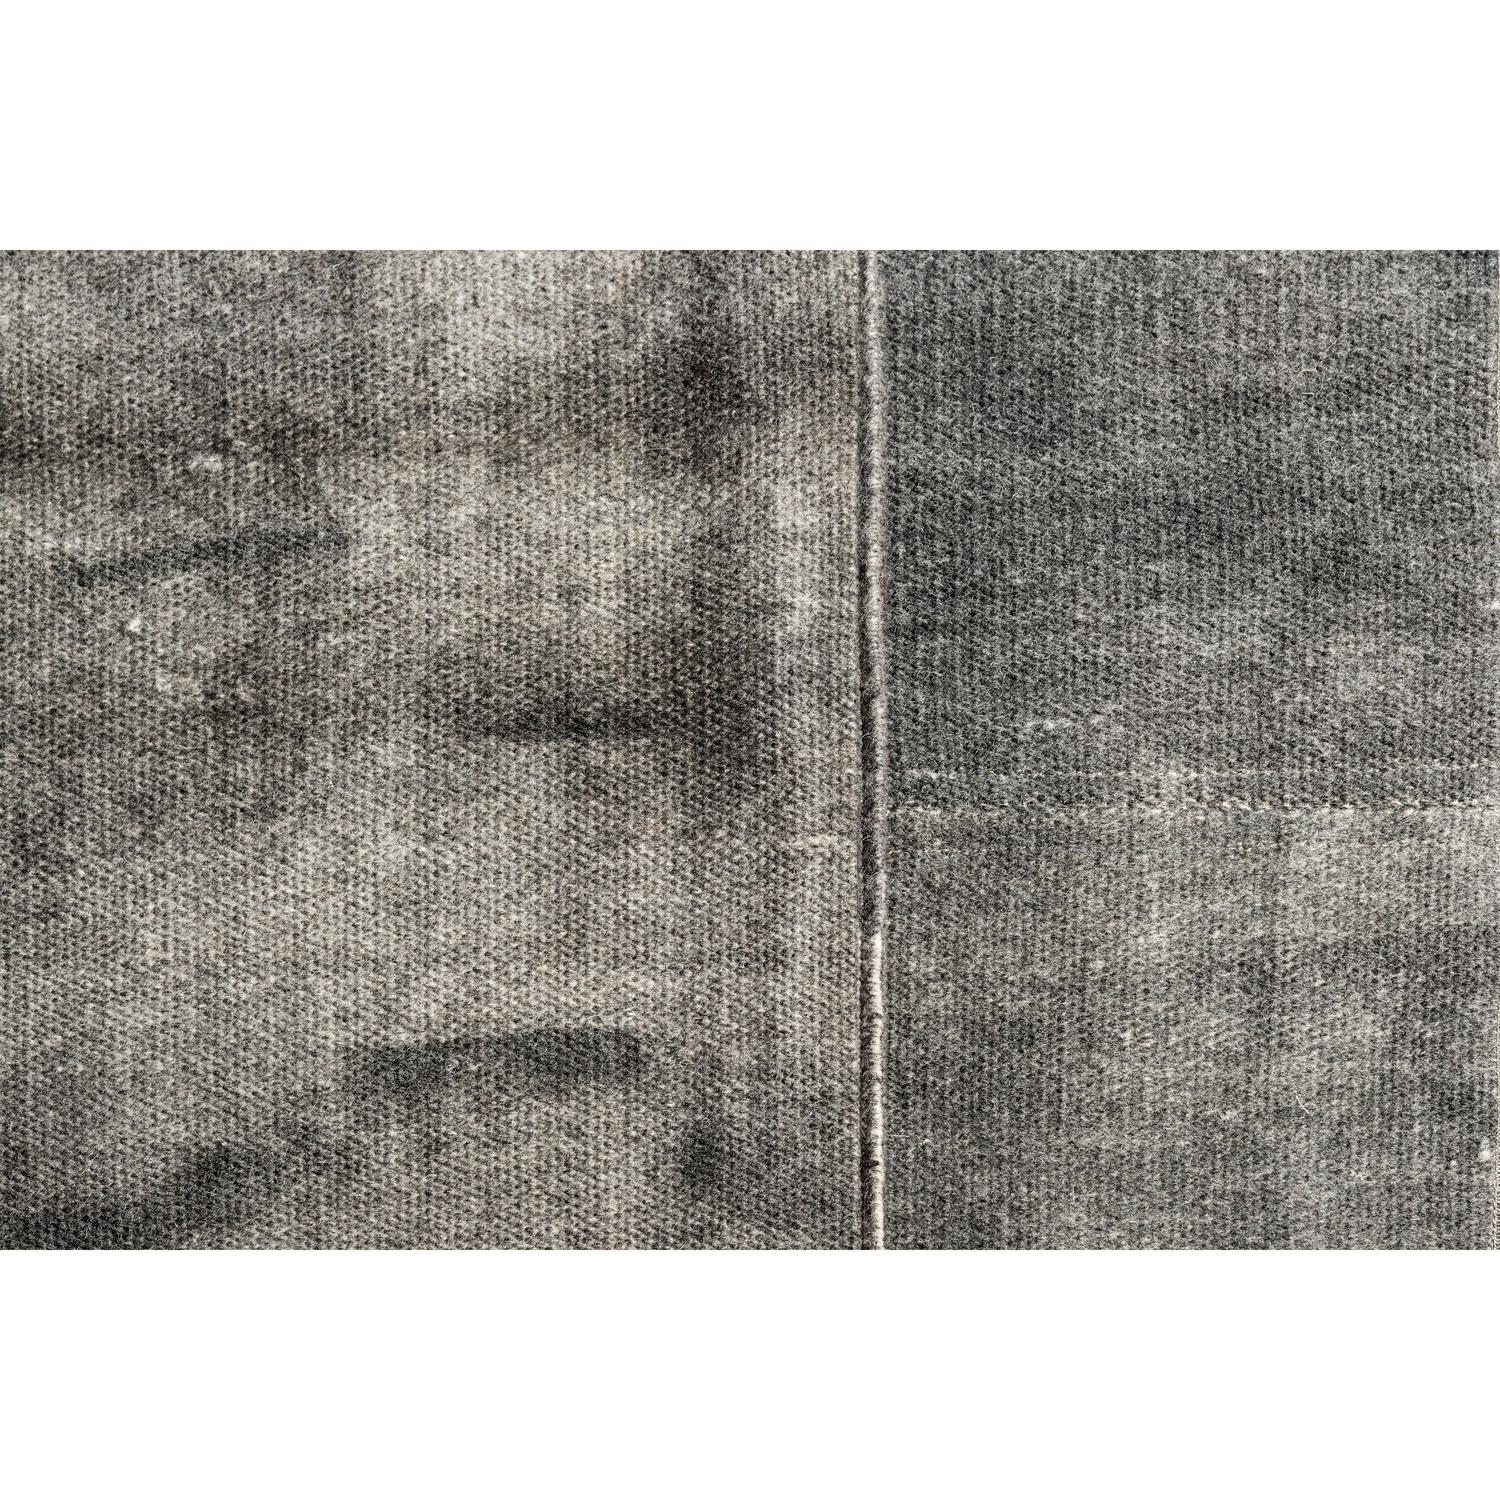 Hand-Woven Contemporary Thin Light Natural Grey Wool Rug by Deanna Comellini 310x390 cm For Sale